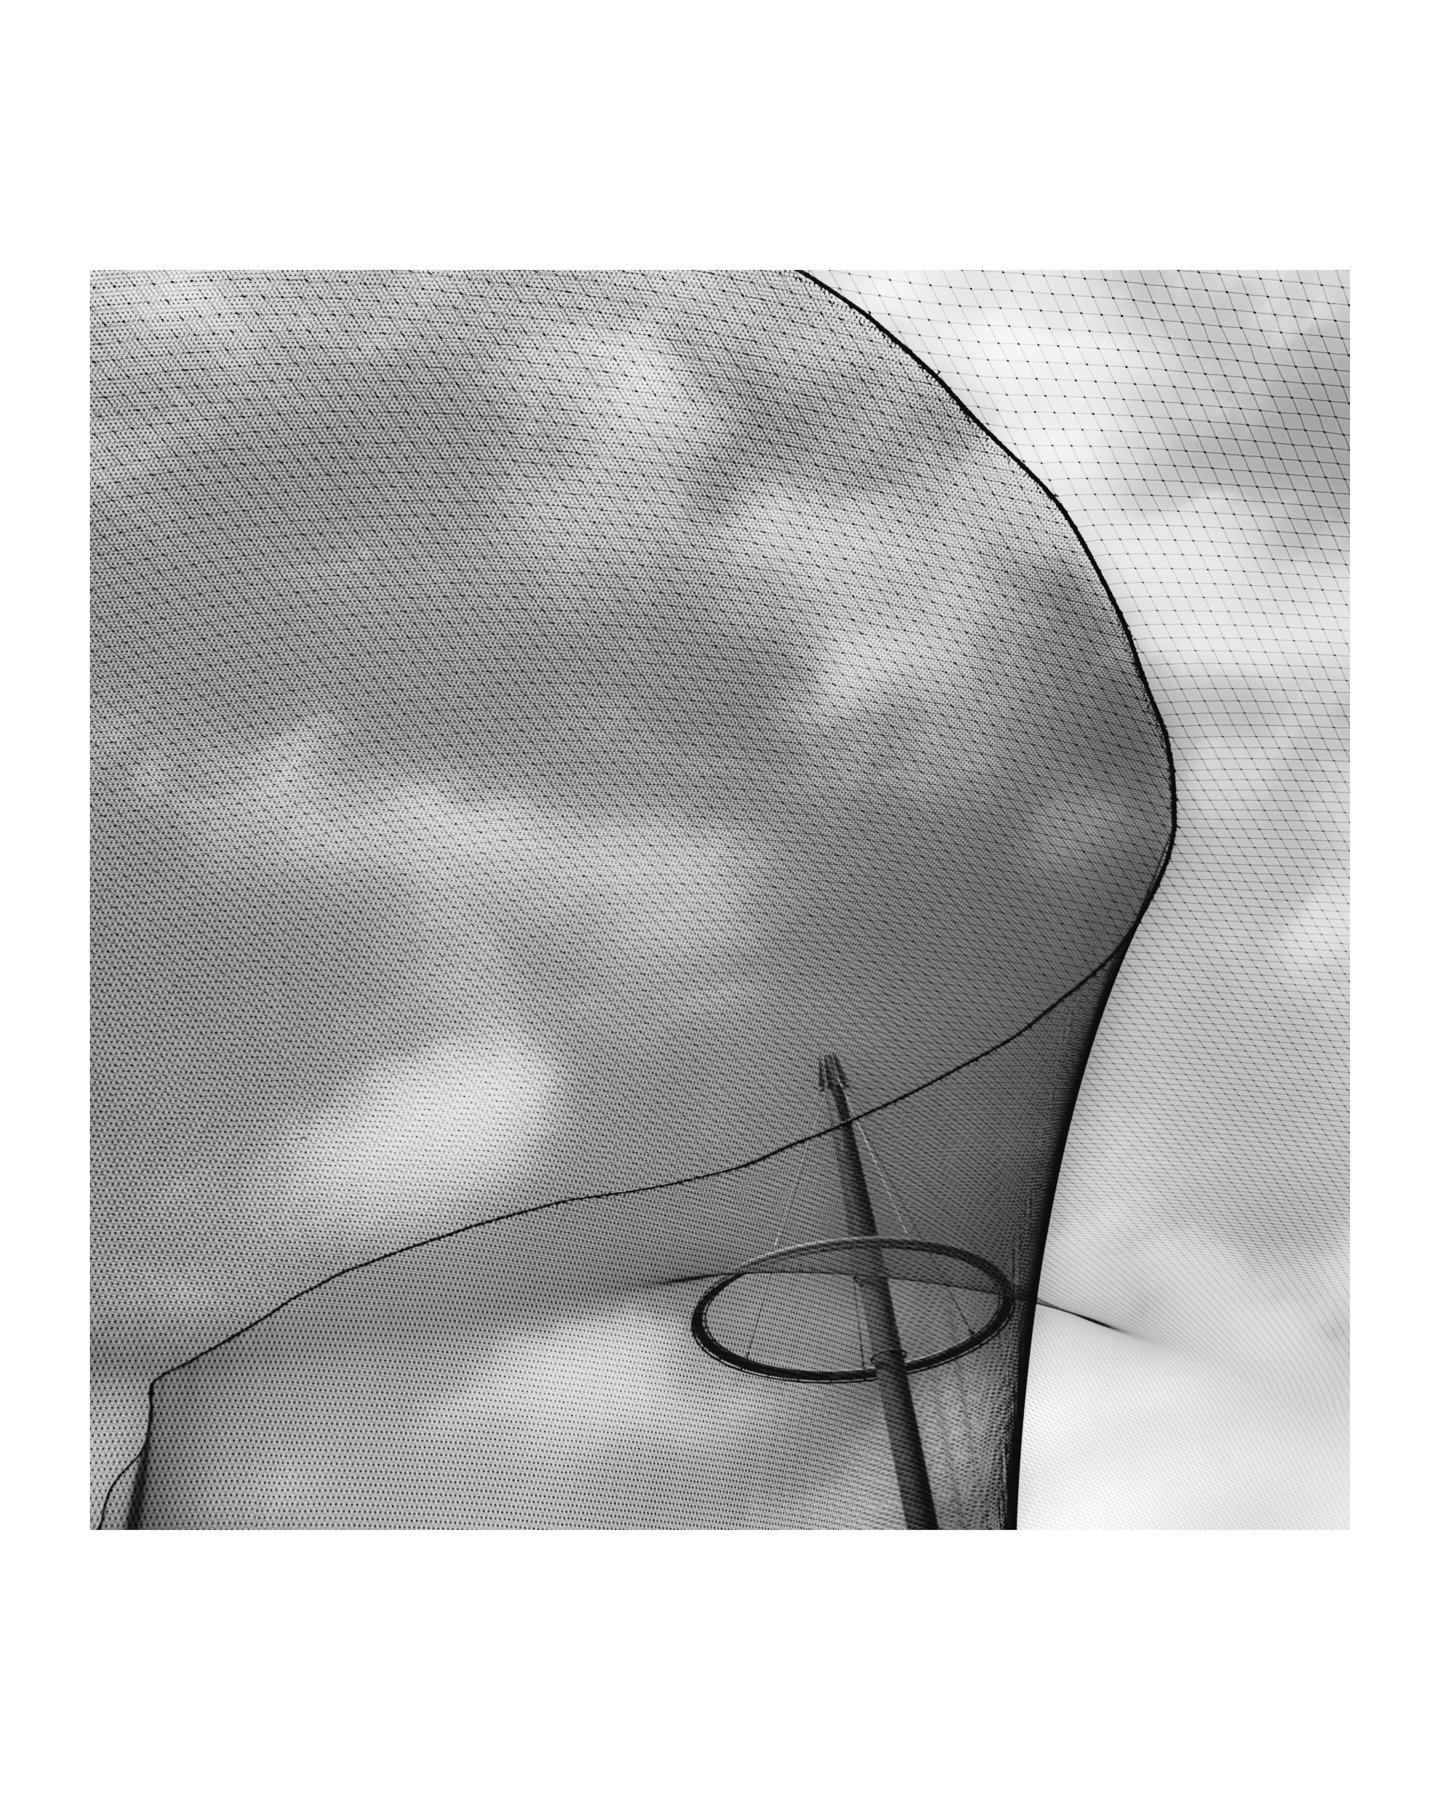 Lines in the Sky 03